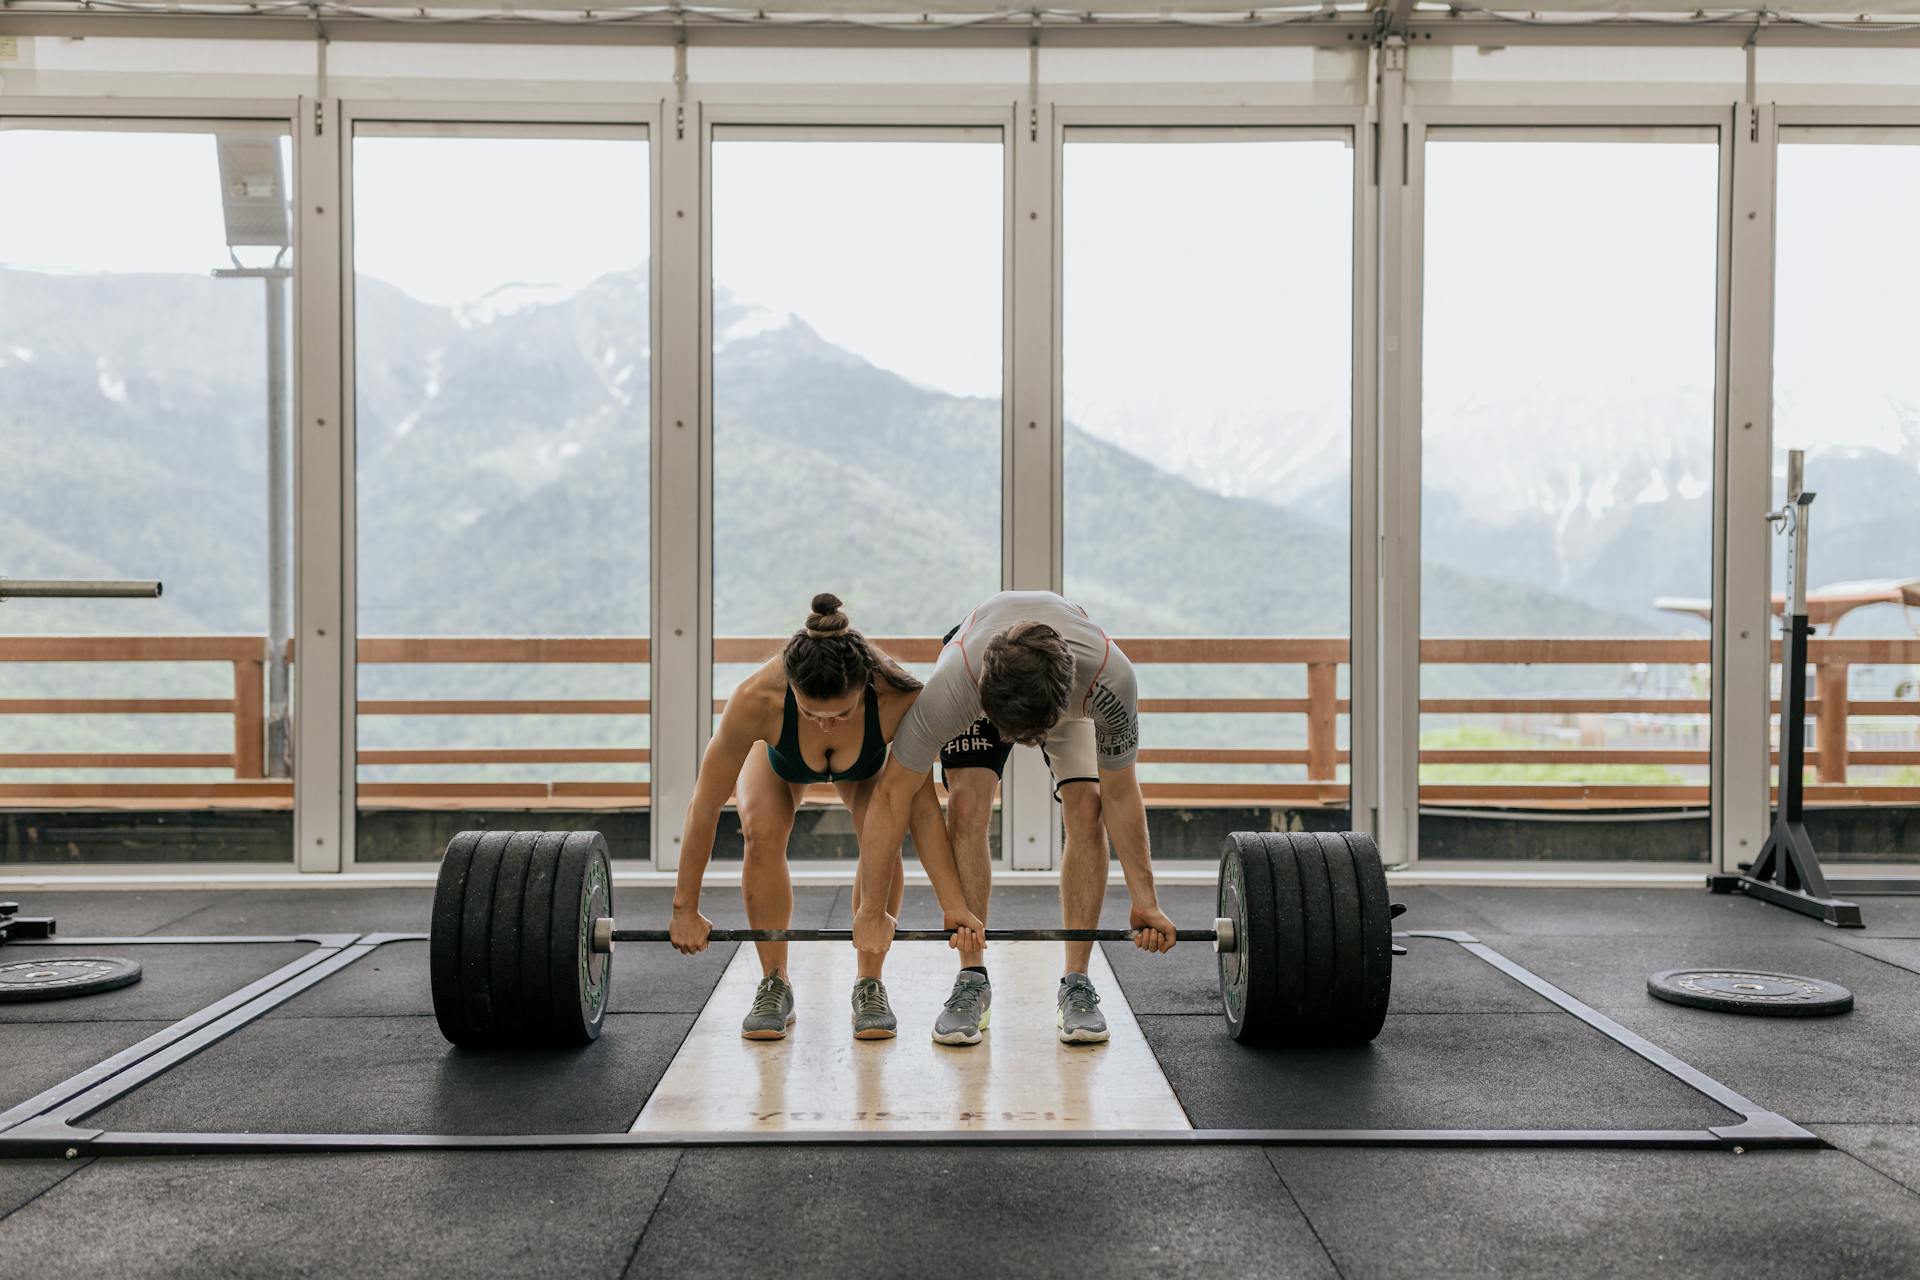 Woman and man prepare to lift a very heavy barbell together.